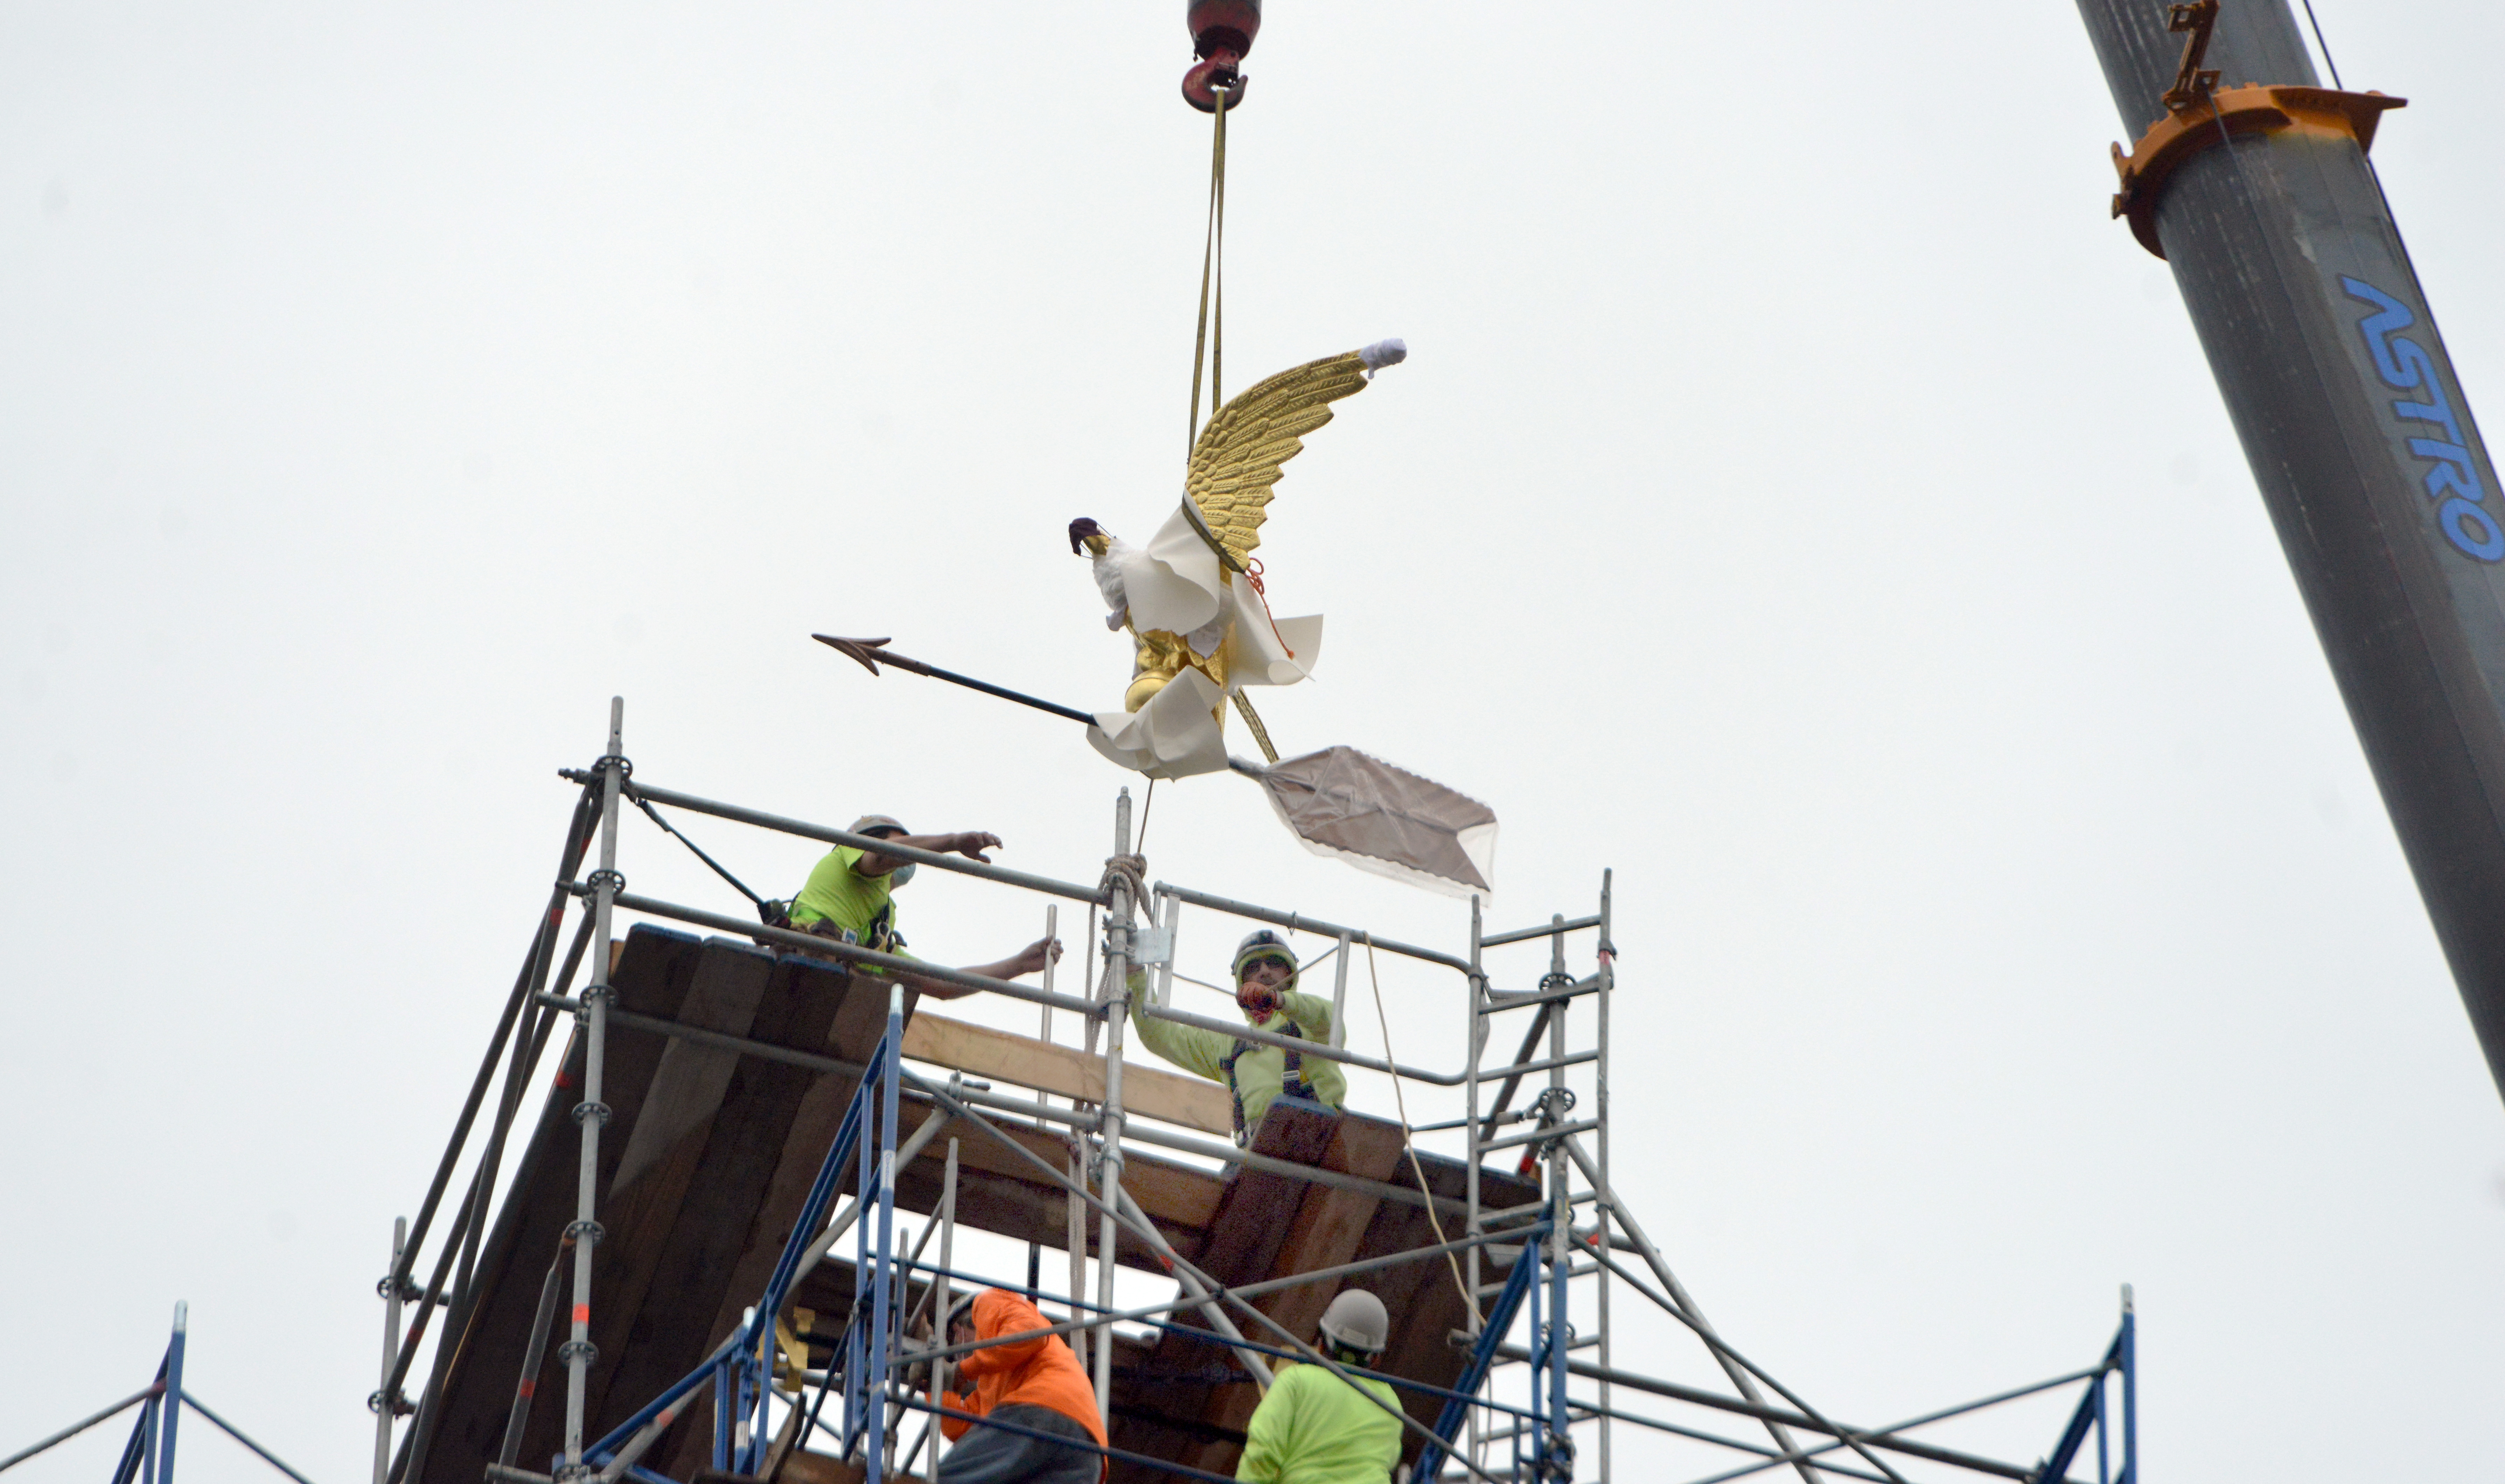 10/6/2020 -Chicopee-   A replica of  the "Chicopee Eagle Weathervane" is placed on top of the City Hall Clock Tower, now undergoing renovations. The original eagle will be on display in the City Hall auditorium once building renovations are complete.   (Don Treeger / The Republican)